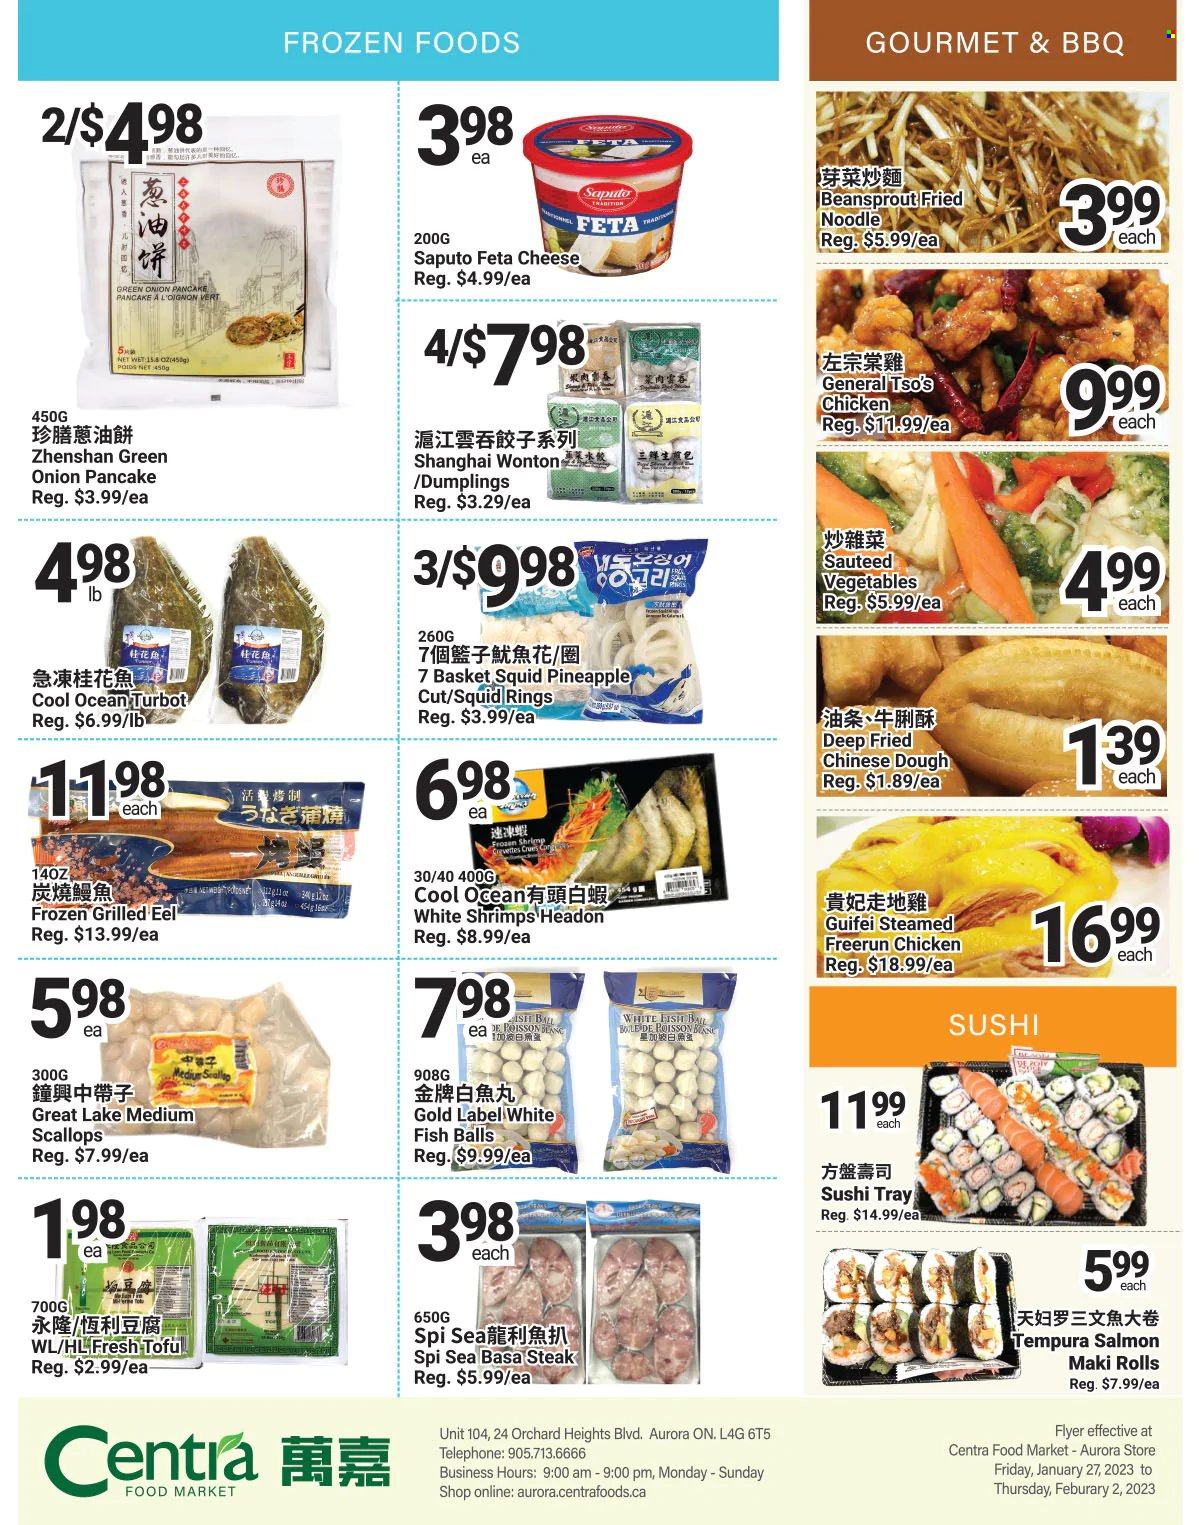 thumbnail - Centra Food Market Flyer - January 27, 2023 - February 02, 2023 - Sales products - onion, green onion, pineapple, eel, salmon, scallops, squid, whitefish, turbot, shrimps, squid rings, pancakes, dumplings, noodles, cheese, feta, tofu, basket, tray, pan, steak. Page 3.